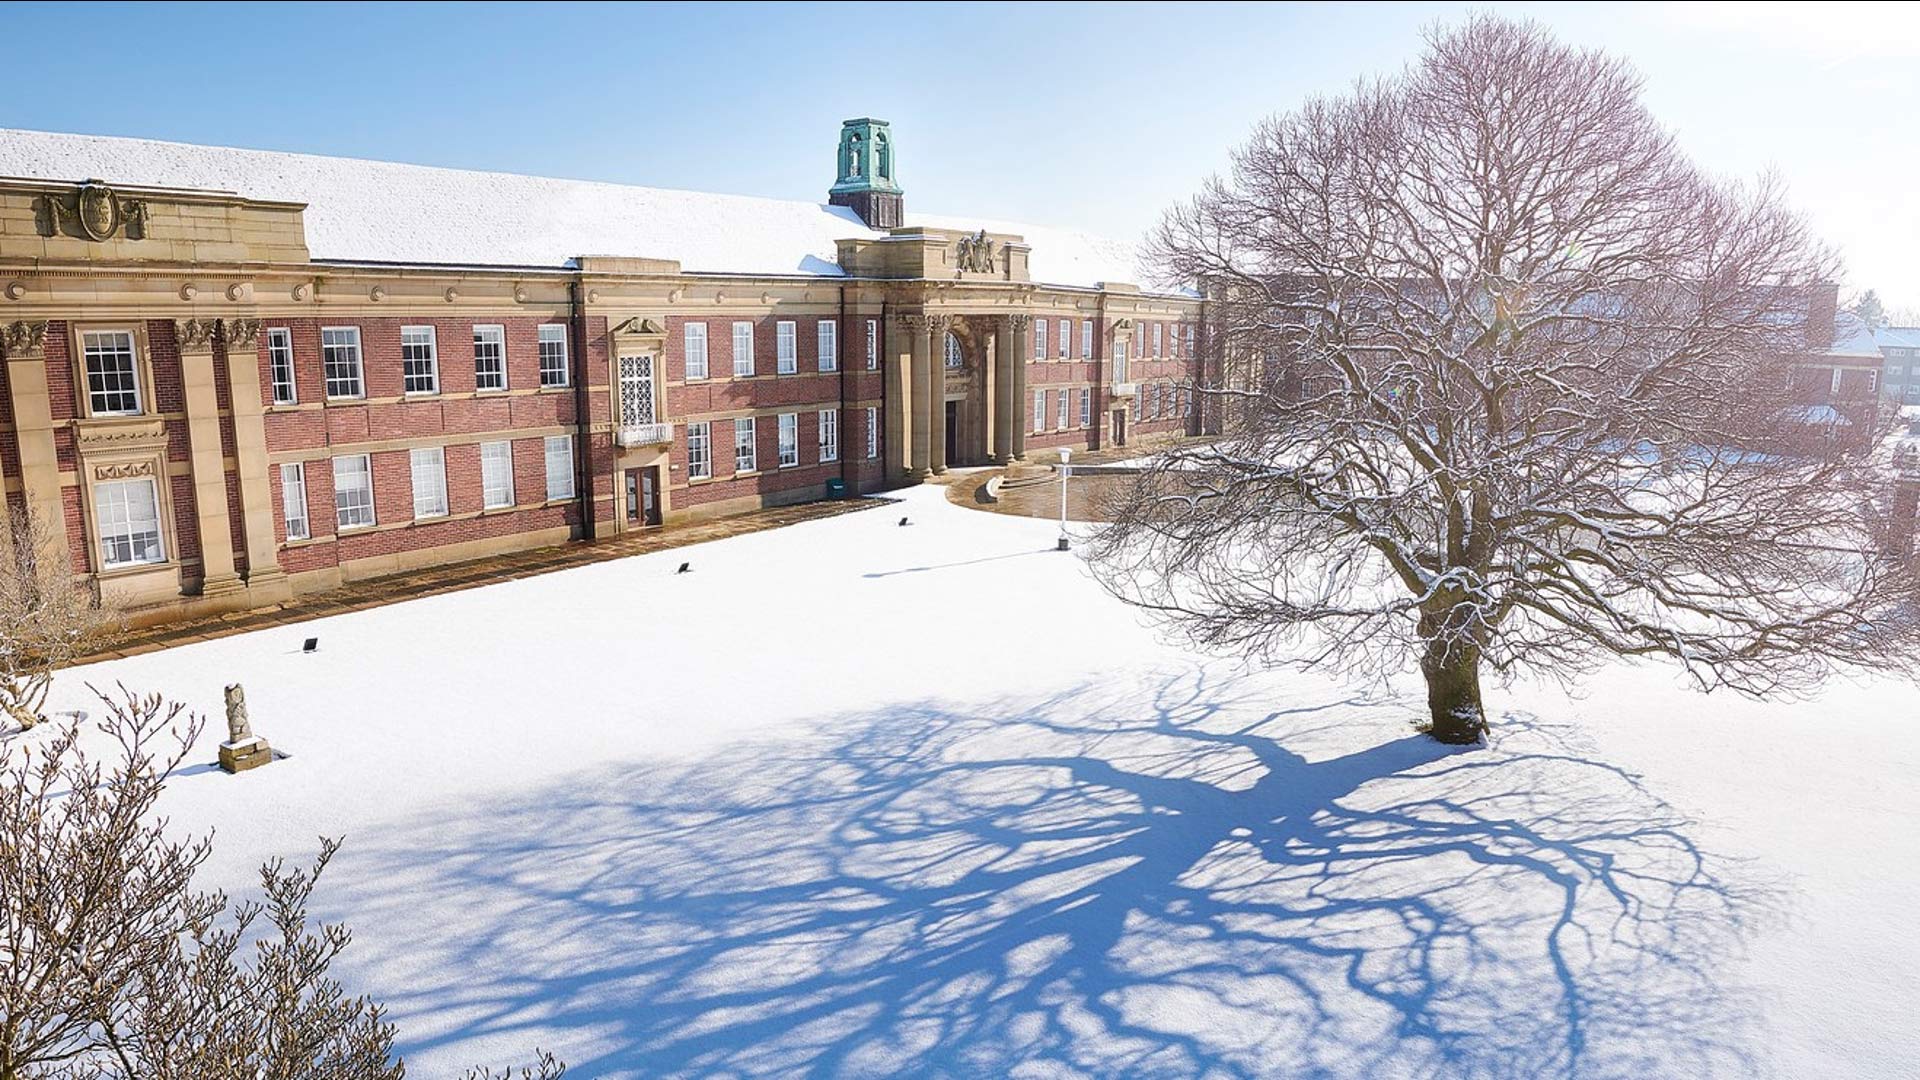 An ariel shot shows the entrance to the Main Building covered in snow.